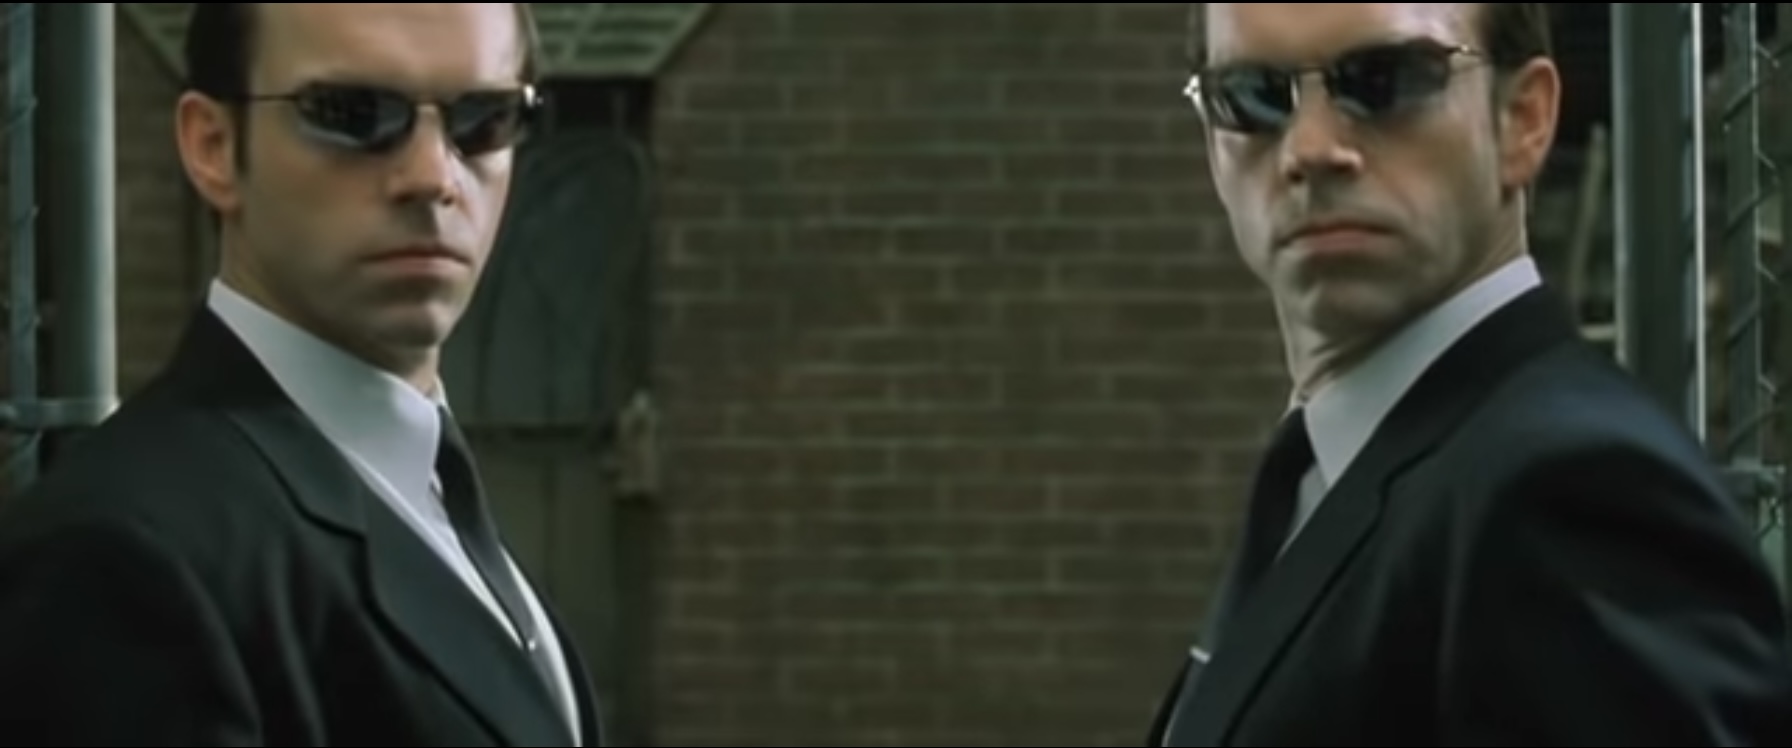 Agent Smith staring at you Blank Meme Template